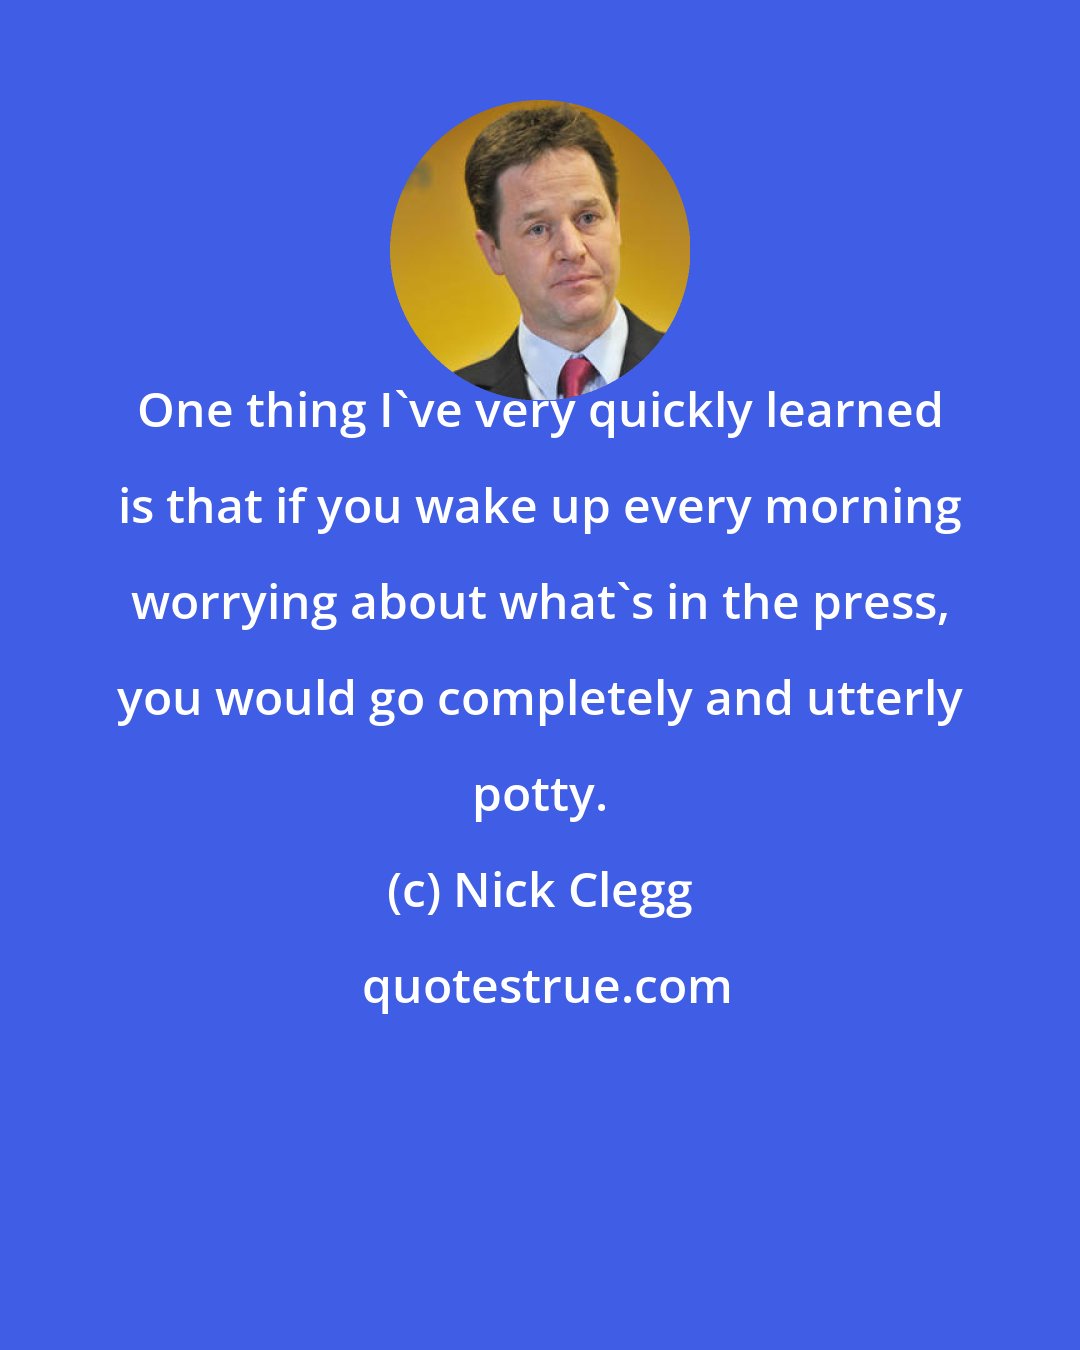 Nick Clegg: One thing I've very quickly learned is that if you wake up every morning worrying about what's in the press, you would go completely and utterly potty.